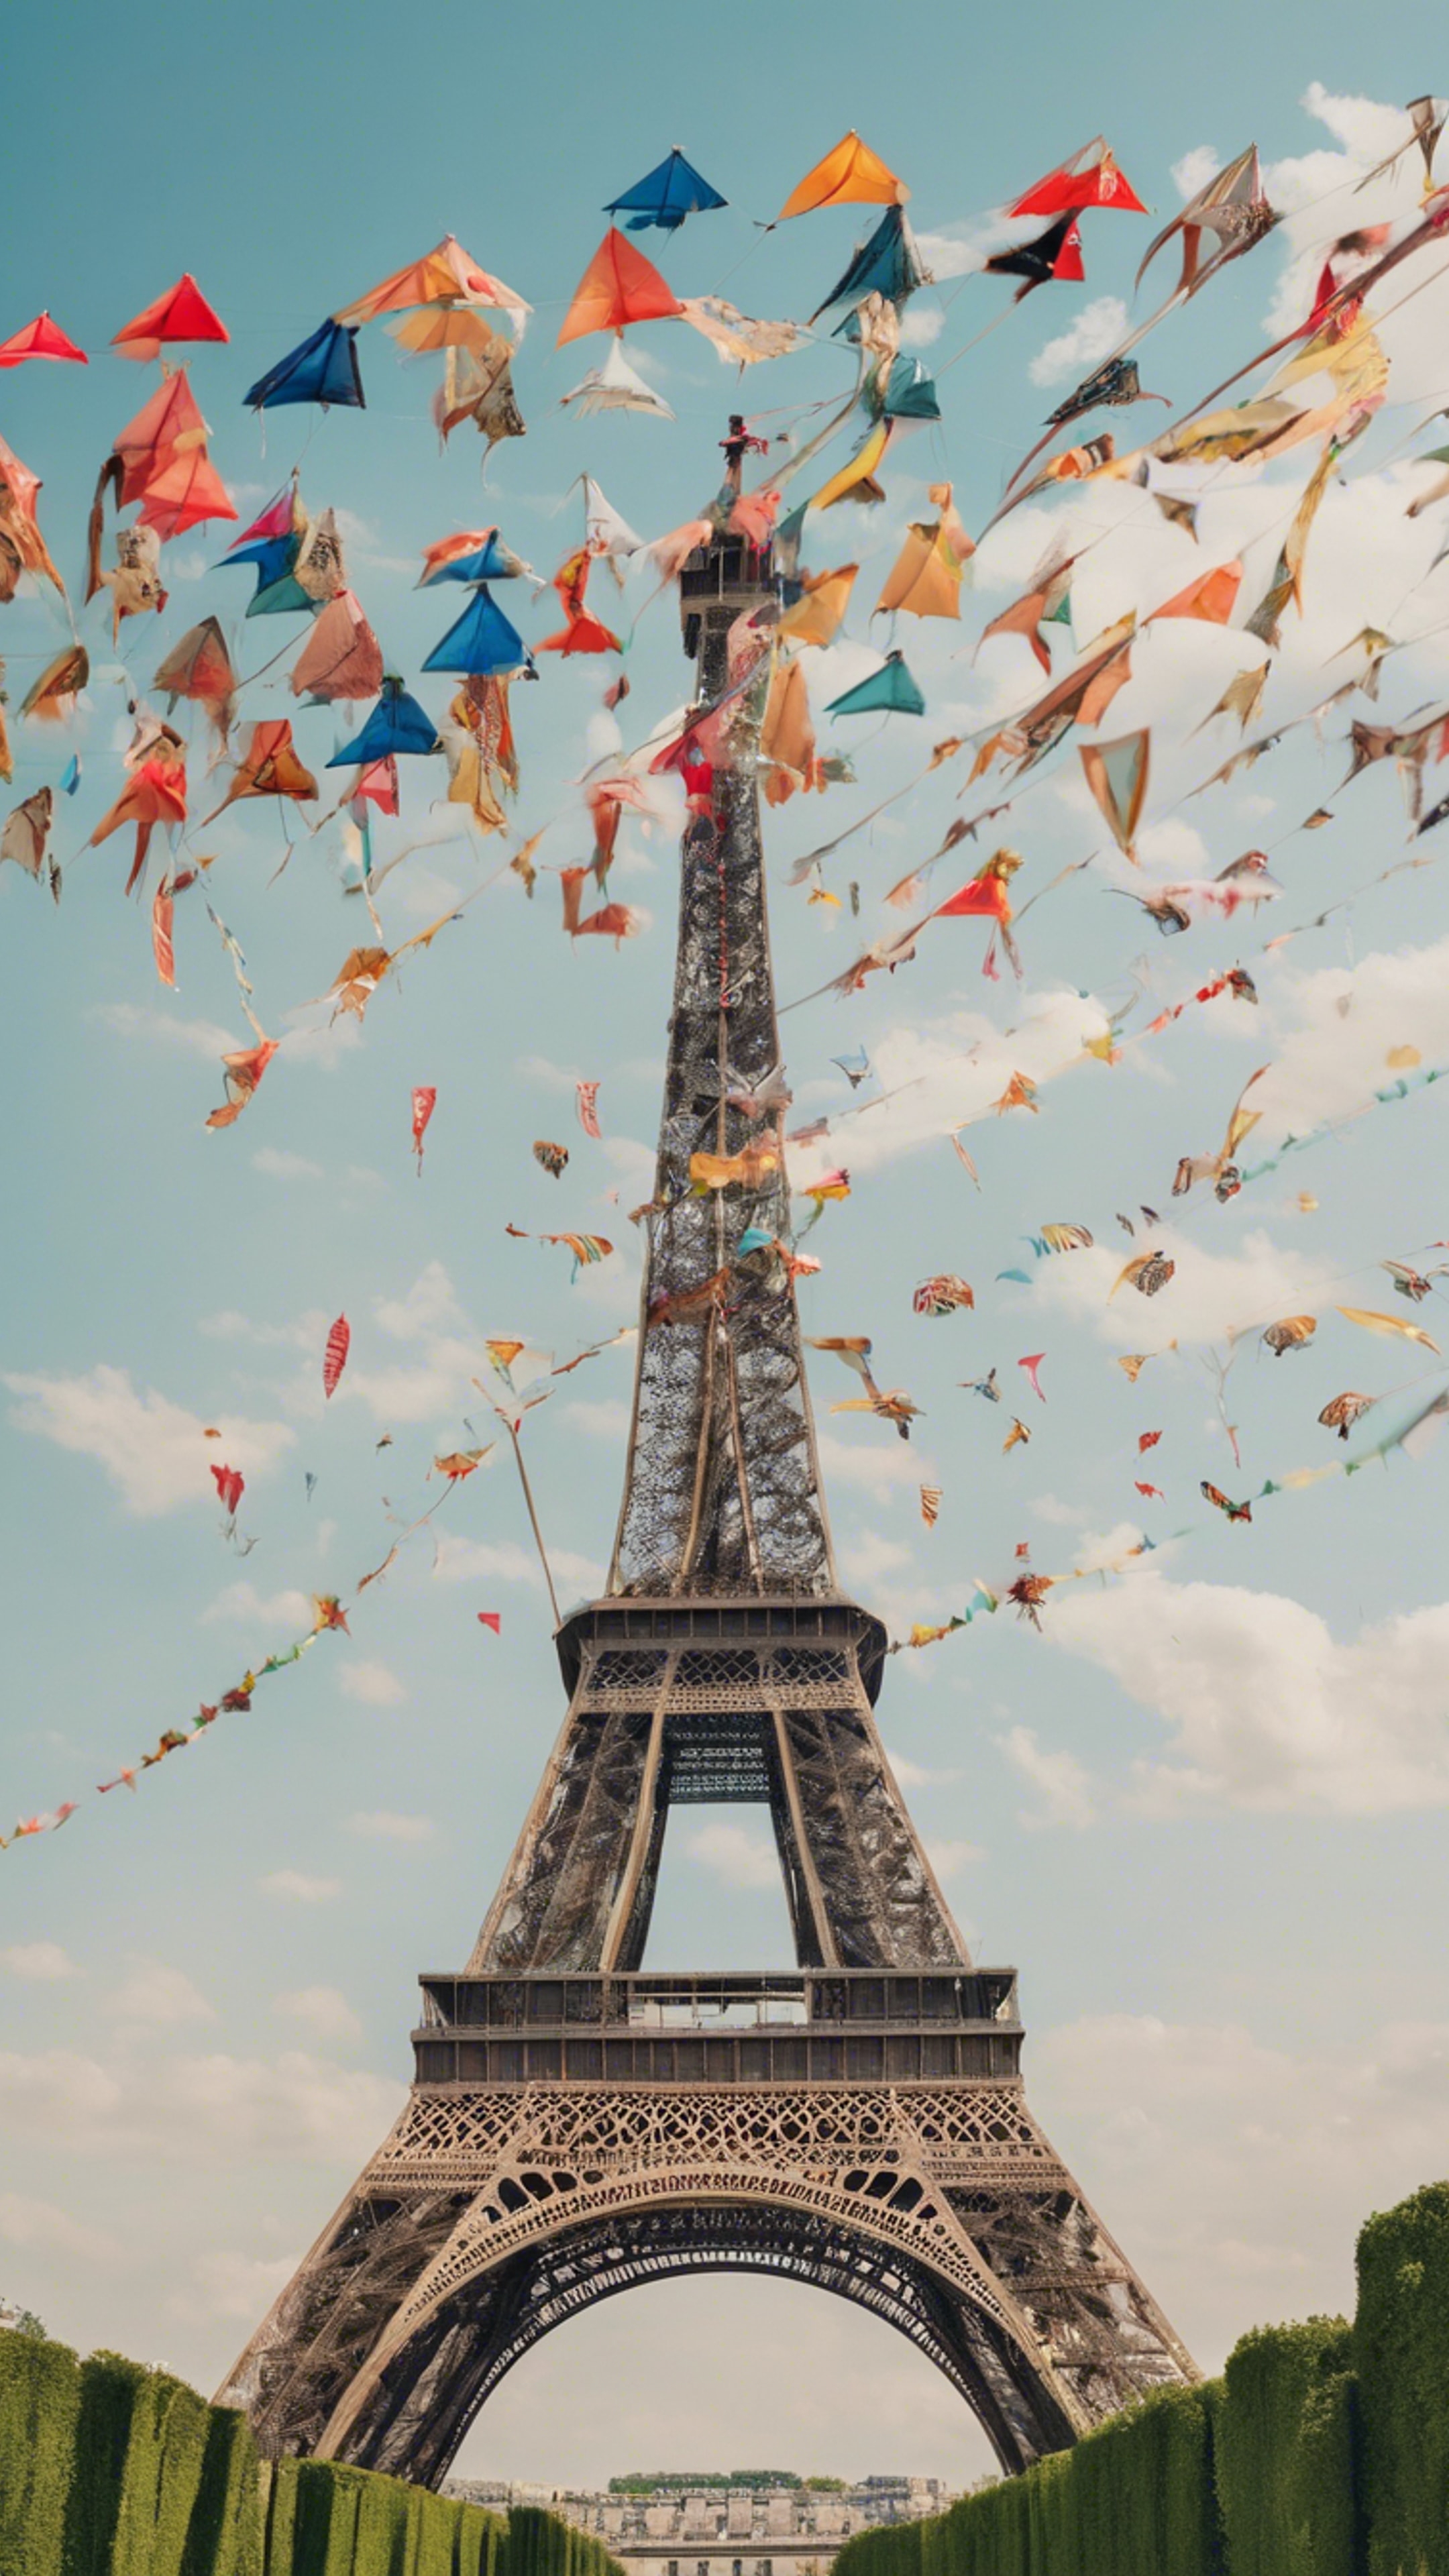 Numerous colorful kites flying around the Eiffel Tower on a breezy summer day. Hintergrund[13c5a5af918a46f7995e]